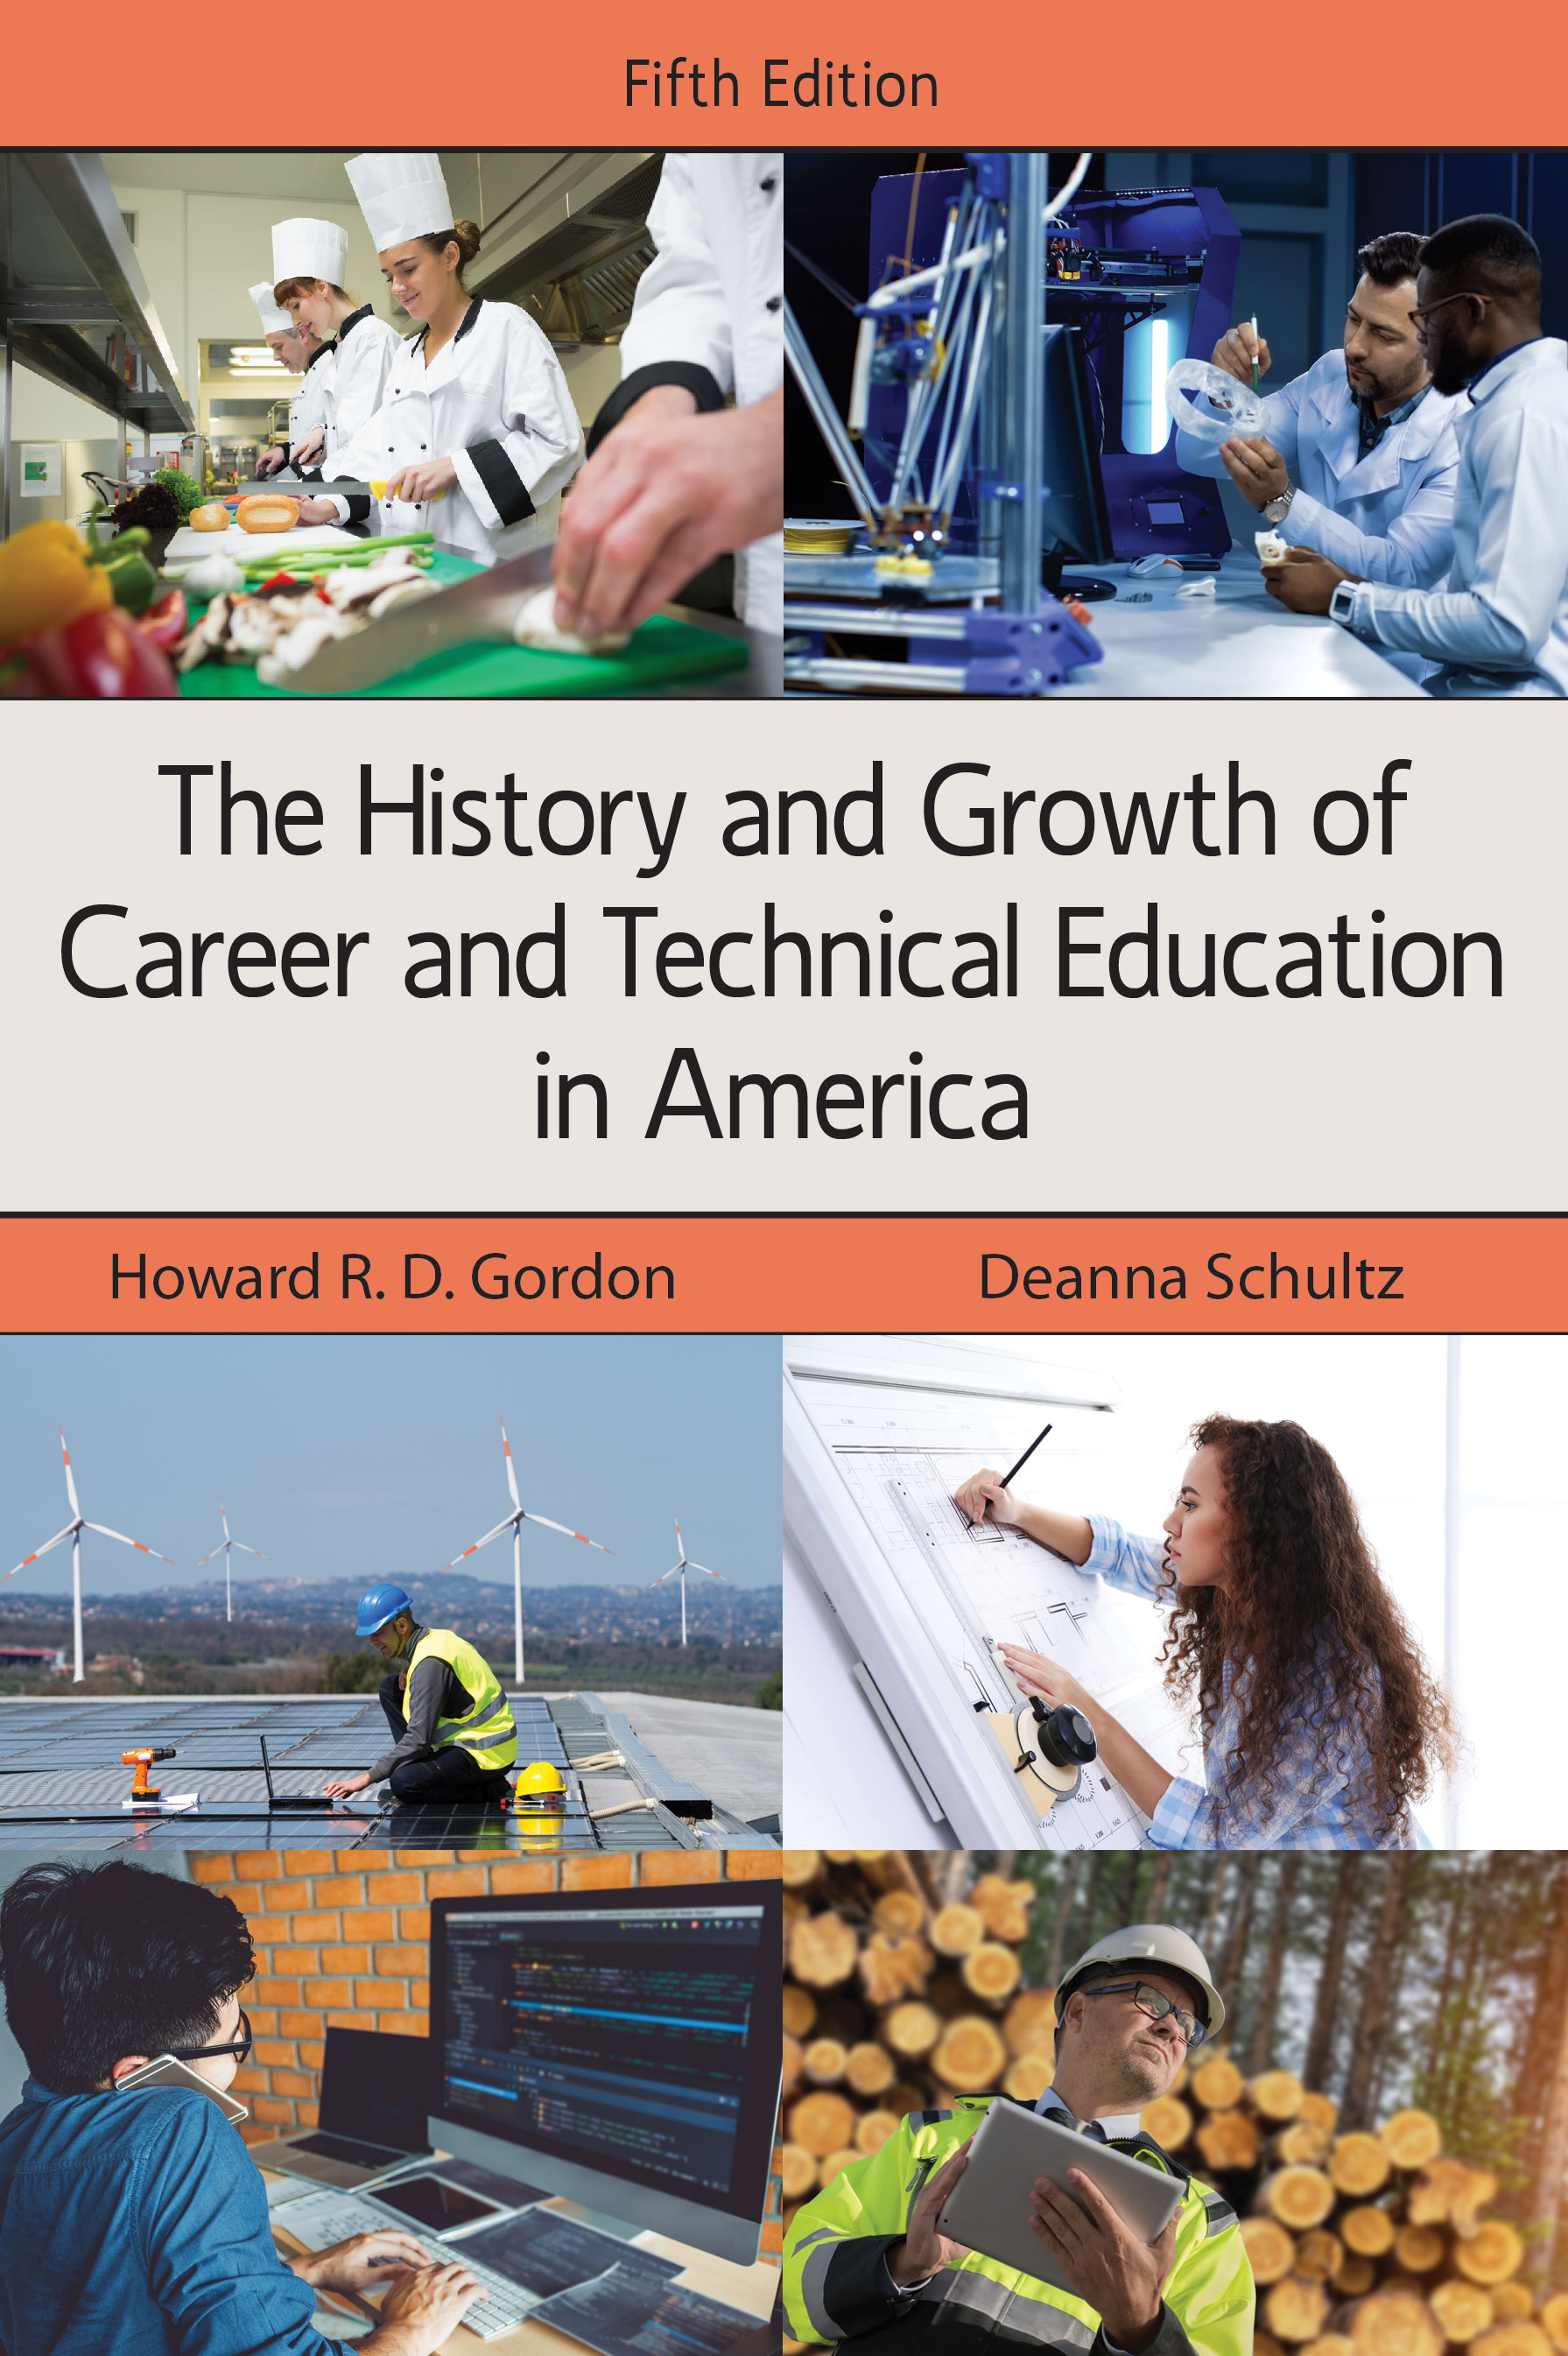 The History and Growth of Career and Technical Education in America:  by Howard R. D. Gordon, Deanna  Schultz